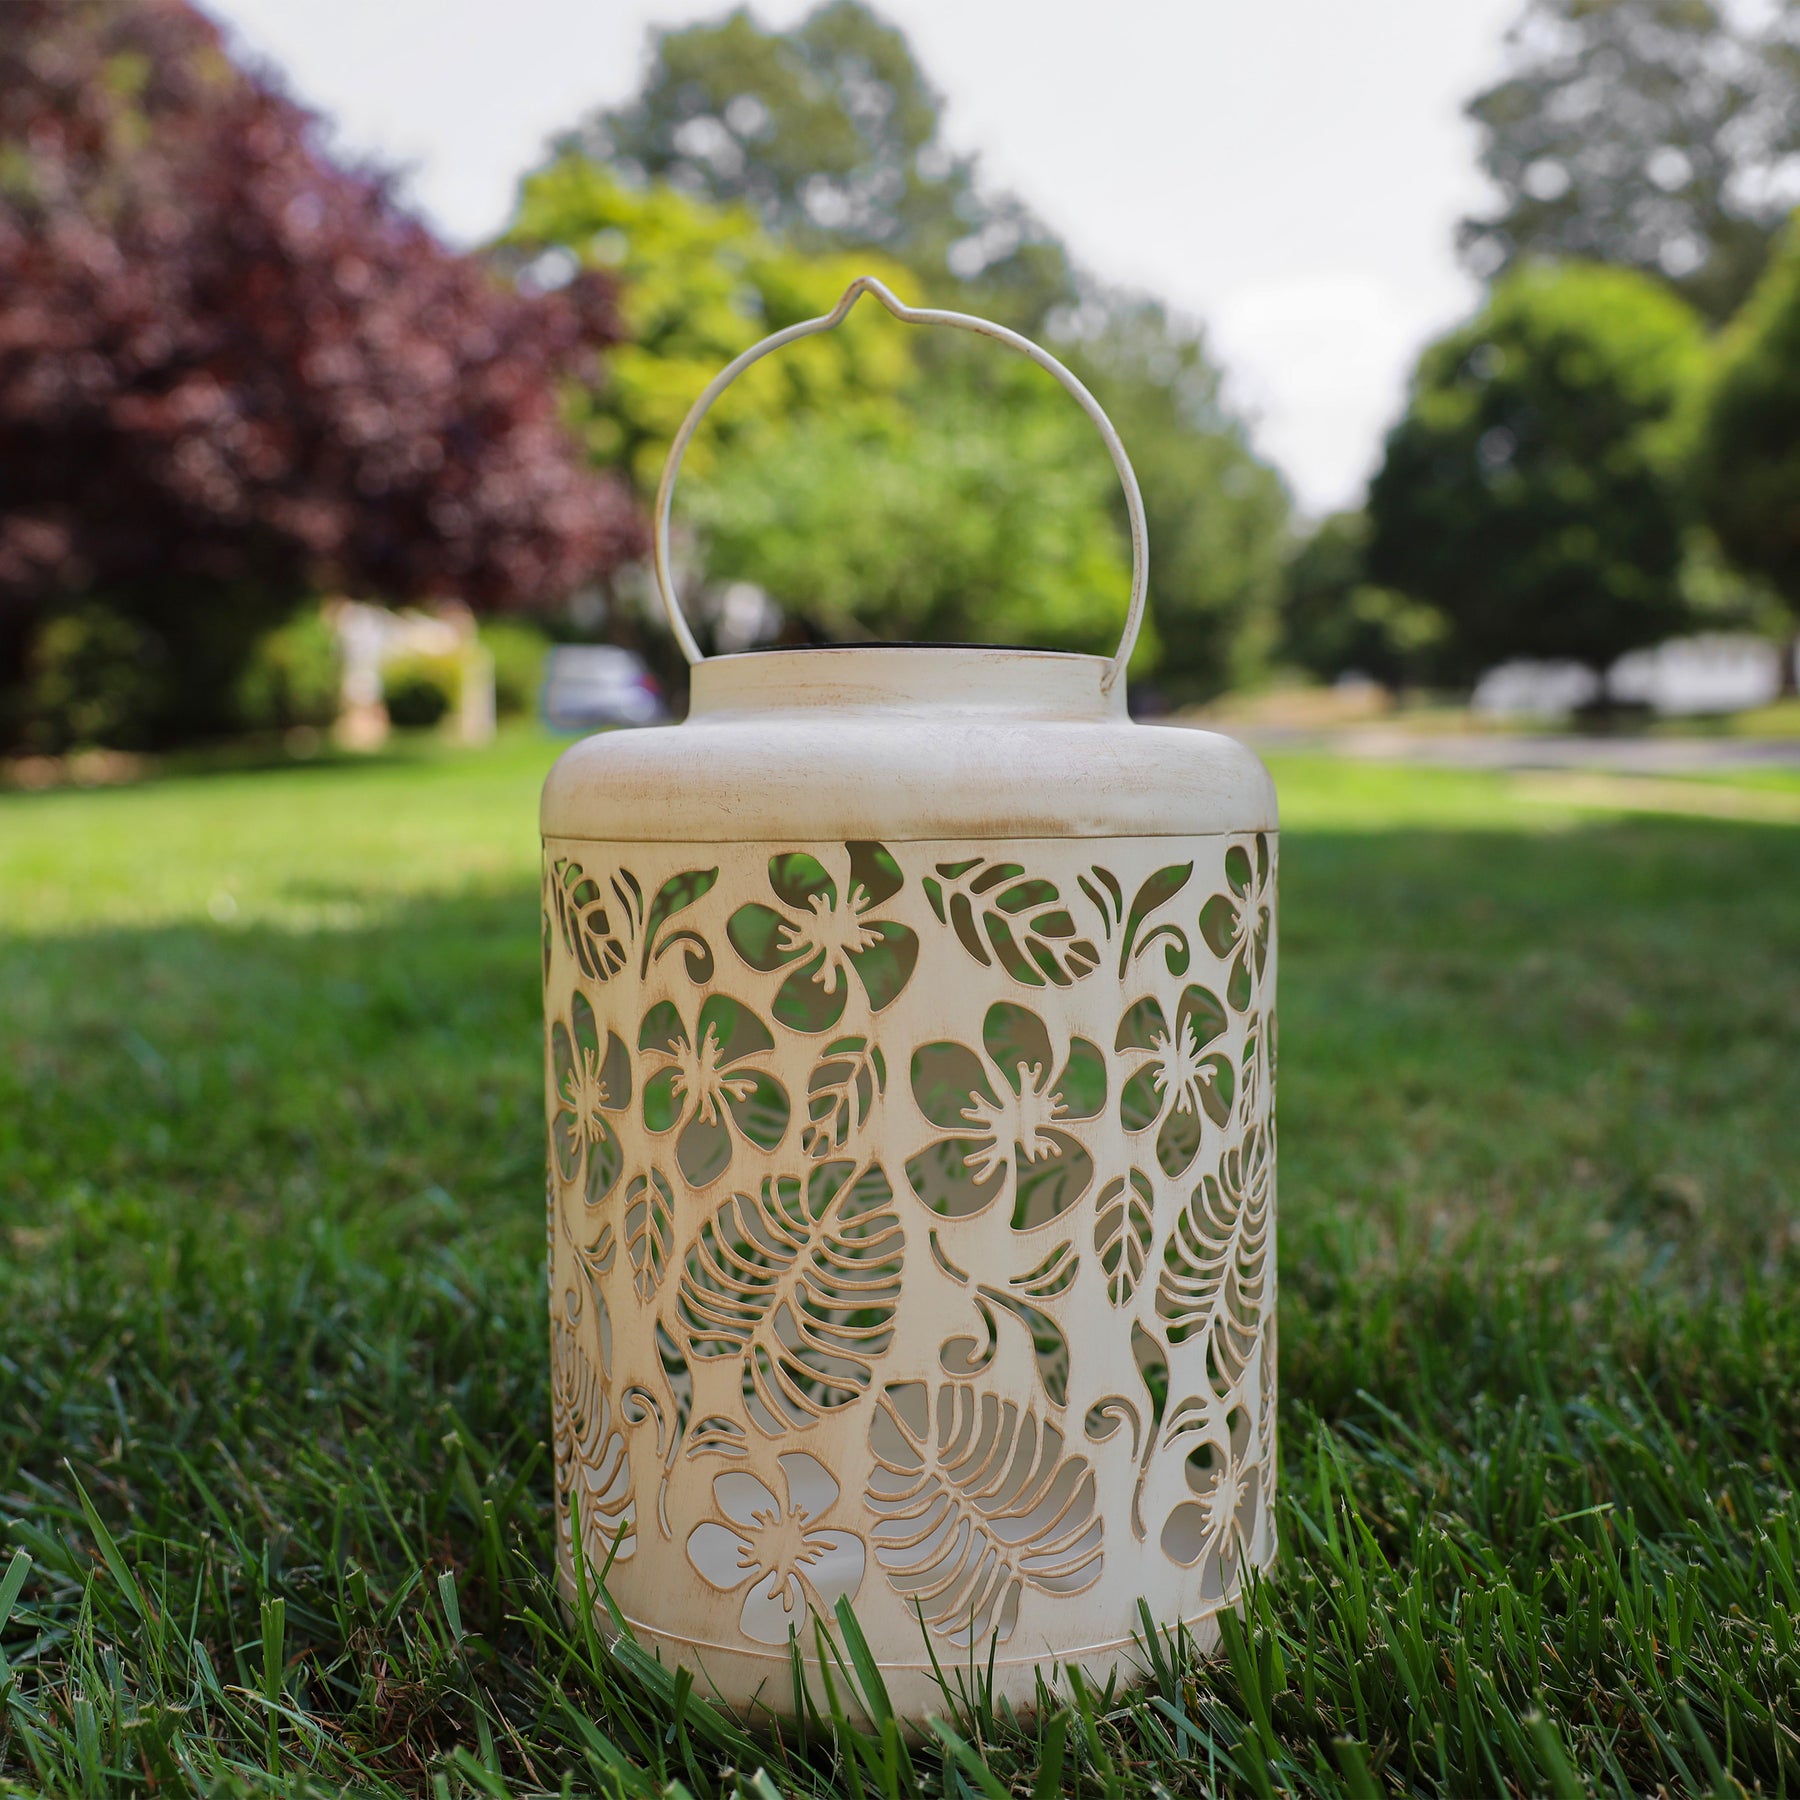 Antique White Solar Lantern with tropical flower design standing on grass.